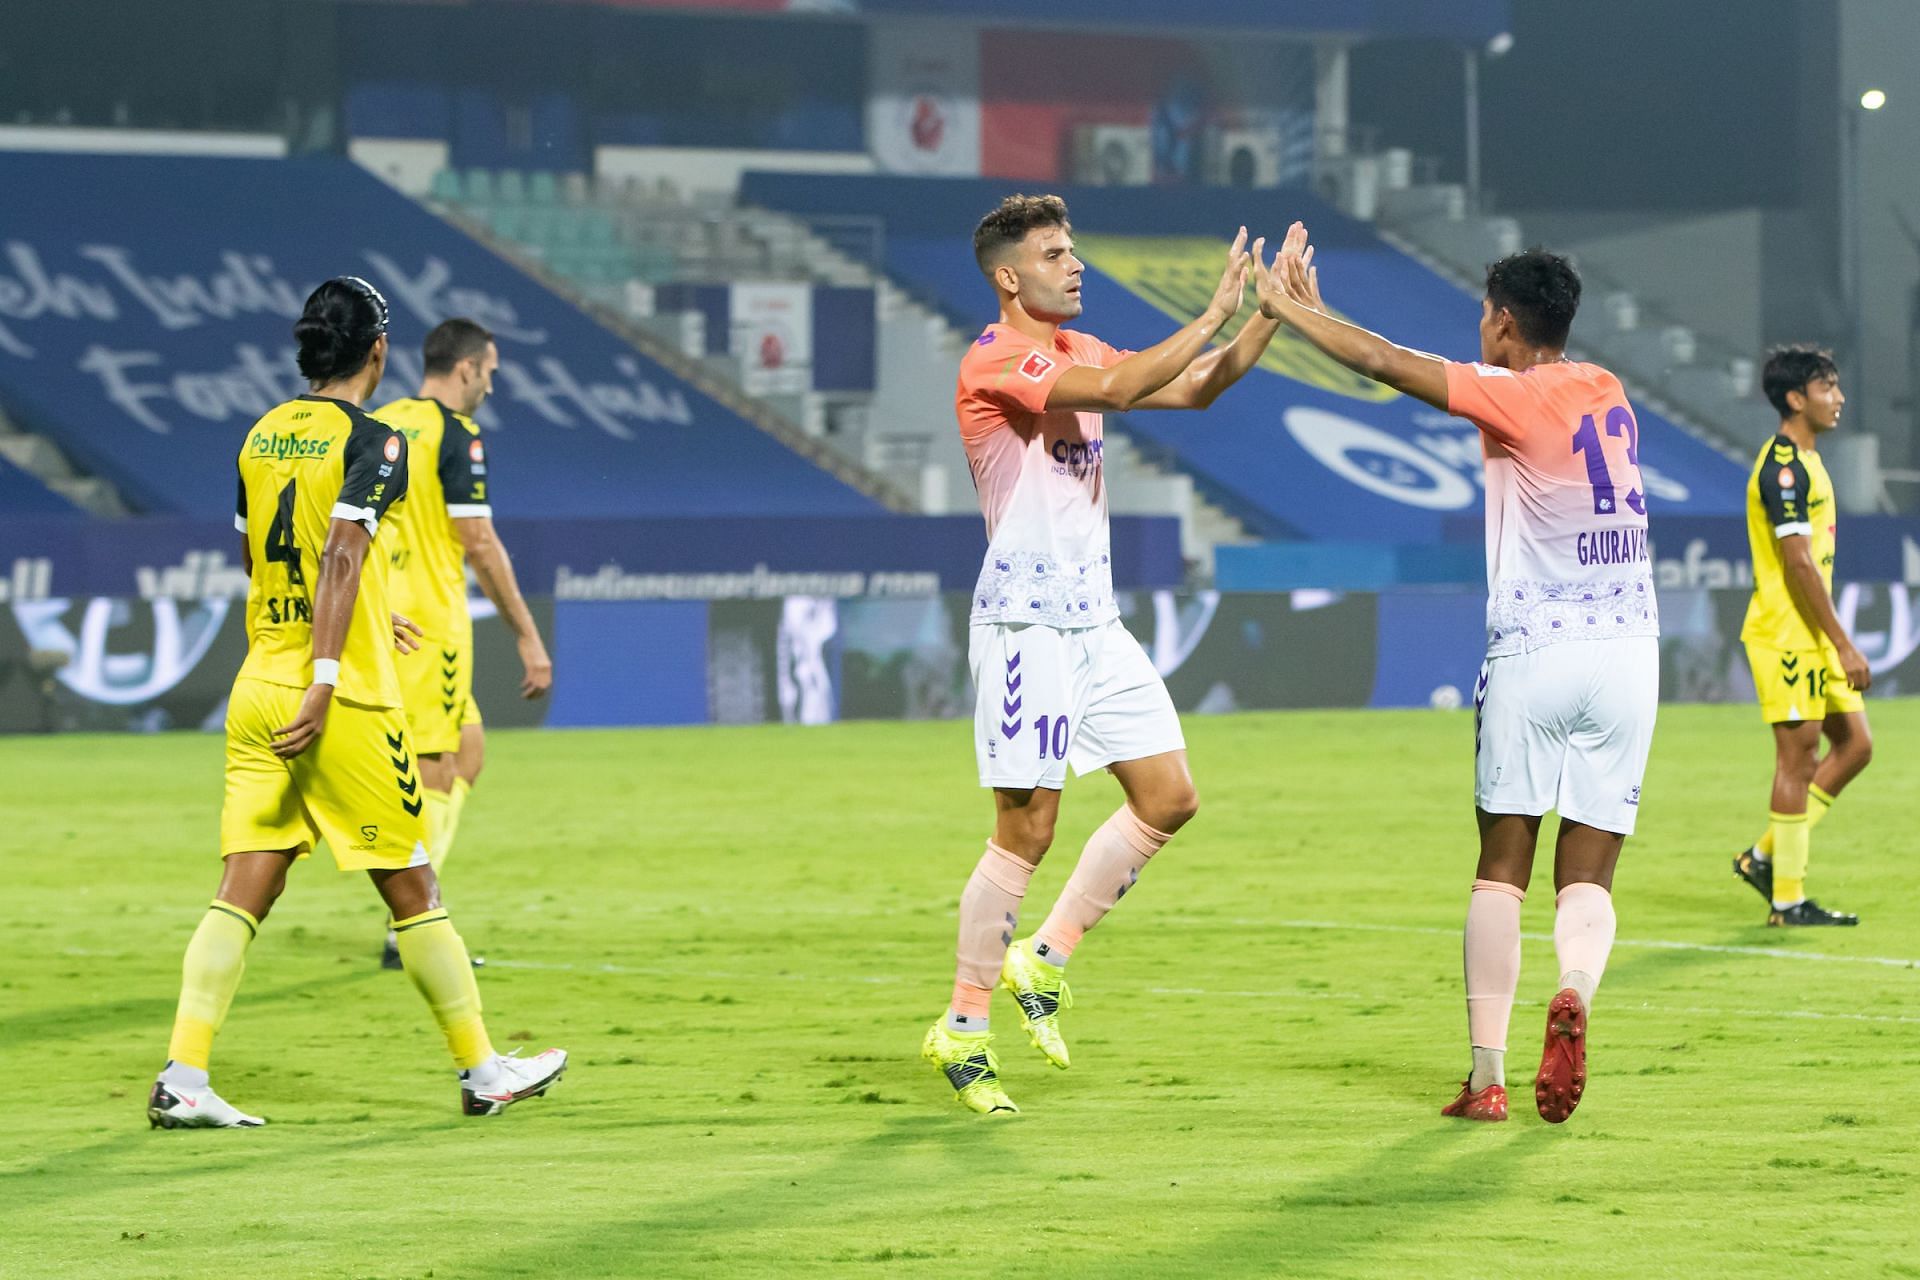 OFC players Javier Hernandez and Gaurav Bora are in good form (Image Courtesy: ISL)